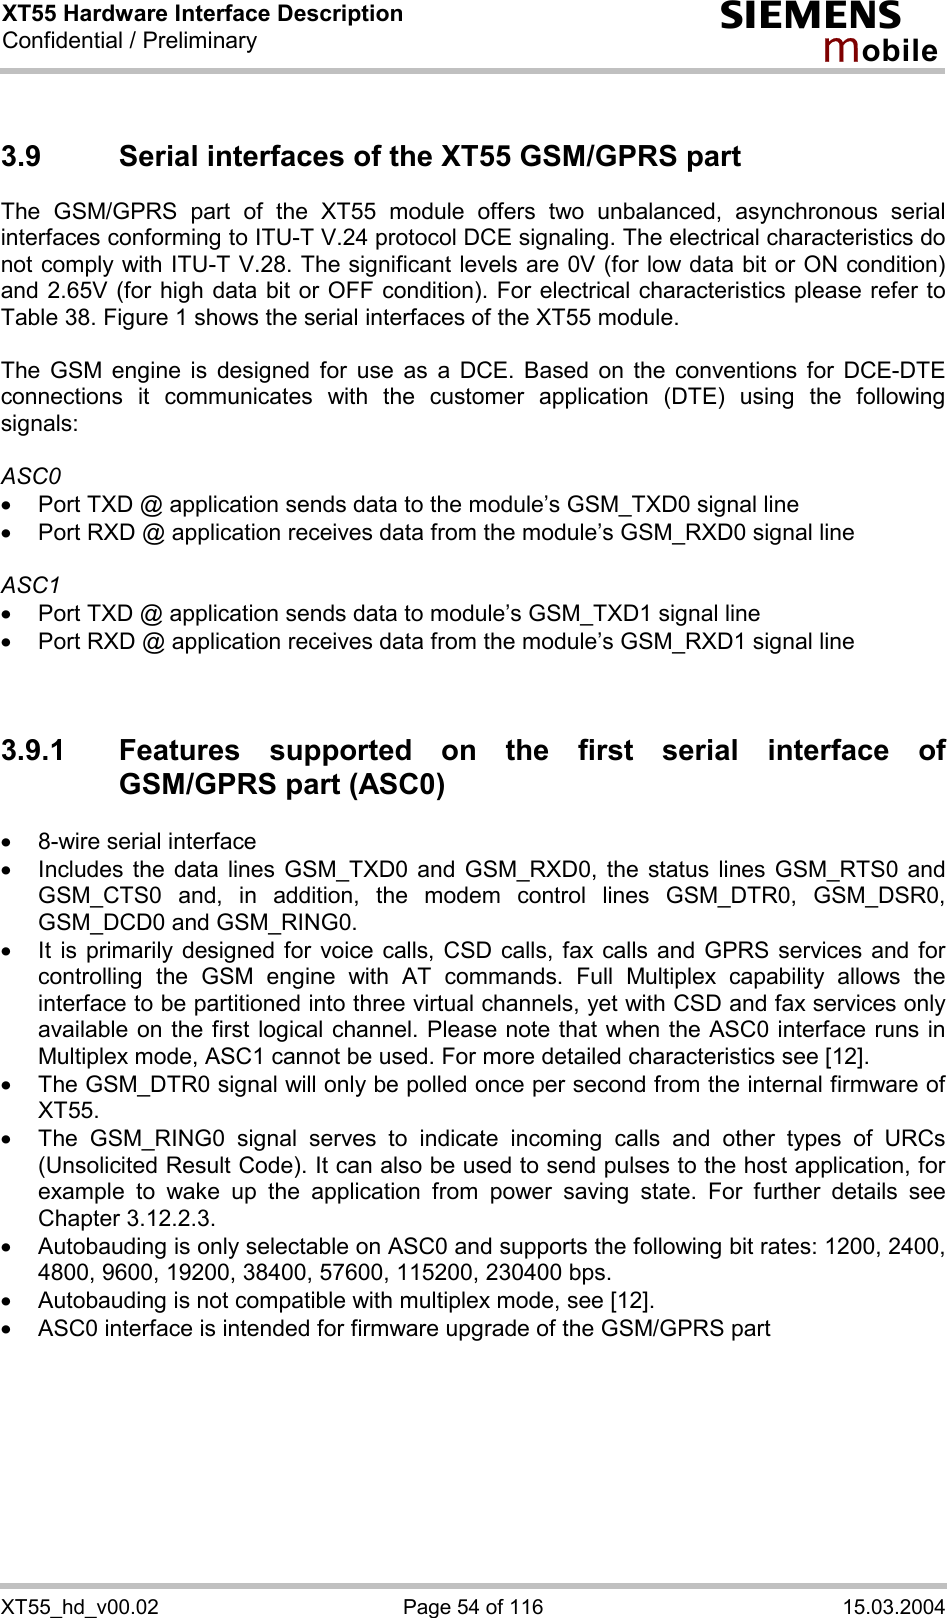 XT55 Hardware Interface Description Confidential / Preliminary s mo b i l e XT55_hd_v00.02  Page 54 of 116  15.03.2004 3.9  Serial interfaces of the XT55 GSM/GPRS part The GSM/GPRS part of the XT55 module offers two unbalanced, asynchronous serial interfaces conforming to ITU-T V.24 protocol DCE signaling. The electrical characteristics do not comply with ITU-T V.28. The significant levels are 0V (for low data bit or ON condition) and 2.65V (for high data bit or OFF condition). For electrical characteristics please refer to Table 38. Figure 1 shows the serial interfaces of the XT55 module.  The GSM engine is designed for use as a DCE. Based on the conventions for DCE-DTE connections it communicates with the customer application (DTE) using the following signals:  ASC0 ·  Port TXD @ application sends data to the module’s GSM_TXD0 signal line ·  Port RXD @ application receives data from the module’s GSM_RXD0 signal line  ASC1 ·  Port TXD @ application sends data to module’s GSM_TXD1 signal line ·  Port RXD @ application receives data from the module’s GSM_RXD1 signal line   3.9.1  Features supported on the first serial interface of GSM/GPRS part (ASC0) ·  8-wire serial interface ·  Includes the data lines GSM_TXD0 and GSM_RXD0, the status lines GSM_RTS0 and GSM_CTS0 and, in addition, the modem control lines GSM_DTR0, GSM_DSR0, GSM_DCD0 and GSM_RING0.  ·  It is primarily designed for voice calls, CSD calls, fax calls and GPRS services and for controlling the GSM engine with AT commands. Full Multiplex capability allows the interface to be partitioned into three virtual channels, yet with CSD and fax services only available on the first logical channel. Please note that when the ASC0 interface runs in Multiplex mode, ASC1 cannot be used. For more detailed characteristics see [12]. ·  The GSM_DTR0 signal will only be polled once per second from the internal firmware of XT55.  ·  The GSM_RING0 signal serves to indicate incoming calls and other types of URCs (Unsolicited Result Code). It can also be used to send pulses to the host application, for example to wake up the application from power saving state. For further details see Chapter 3.12.2.3. ·  Autobauding is only selectable on ASC0 and supports the following bit rates: 1200, 2400, 4800, 9600, 19200, 38400, 57600, 115200, 230400 bps.  ·  Autobauding is not compatible with multiplex mode, see [12]. ·  ASC0 interface is intended for firmware upgrade of the GSM/GPRS part   